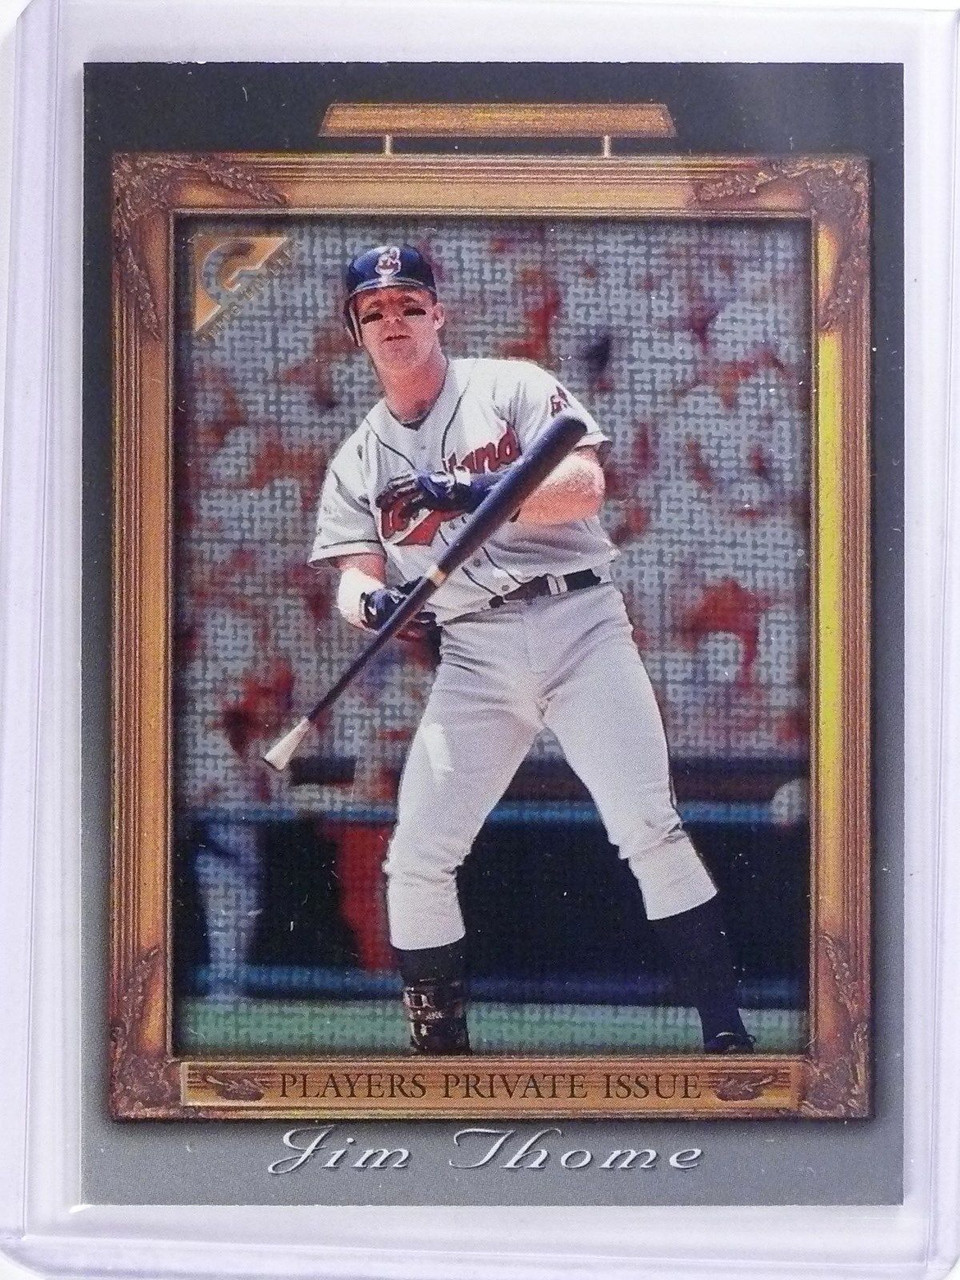 1998 Topps Gallery Player's Private Issue Jim Thome #D019/250